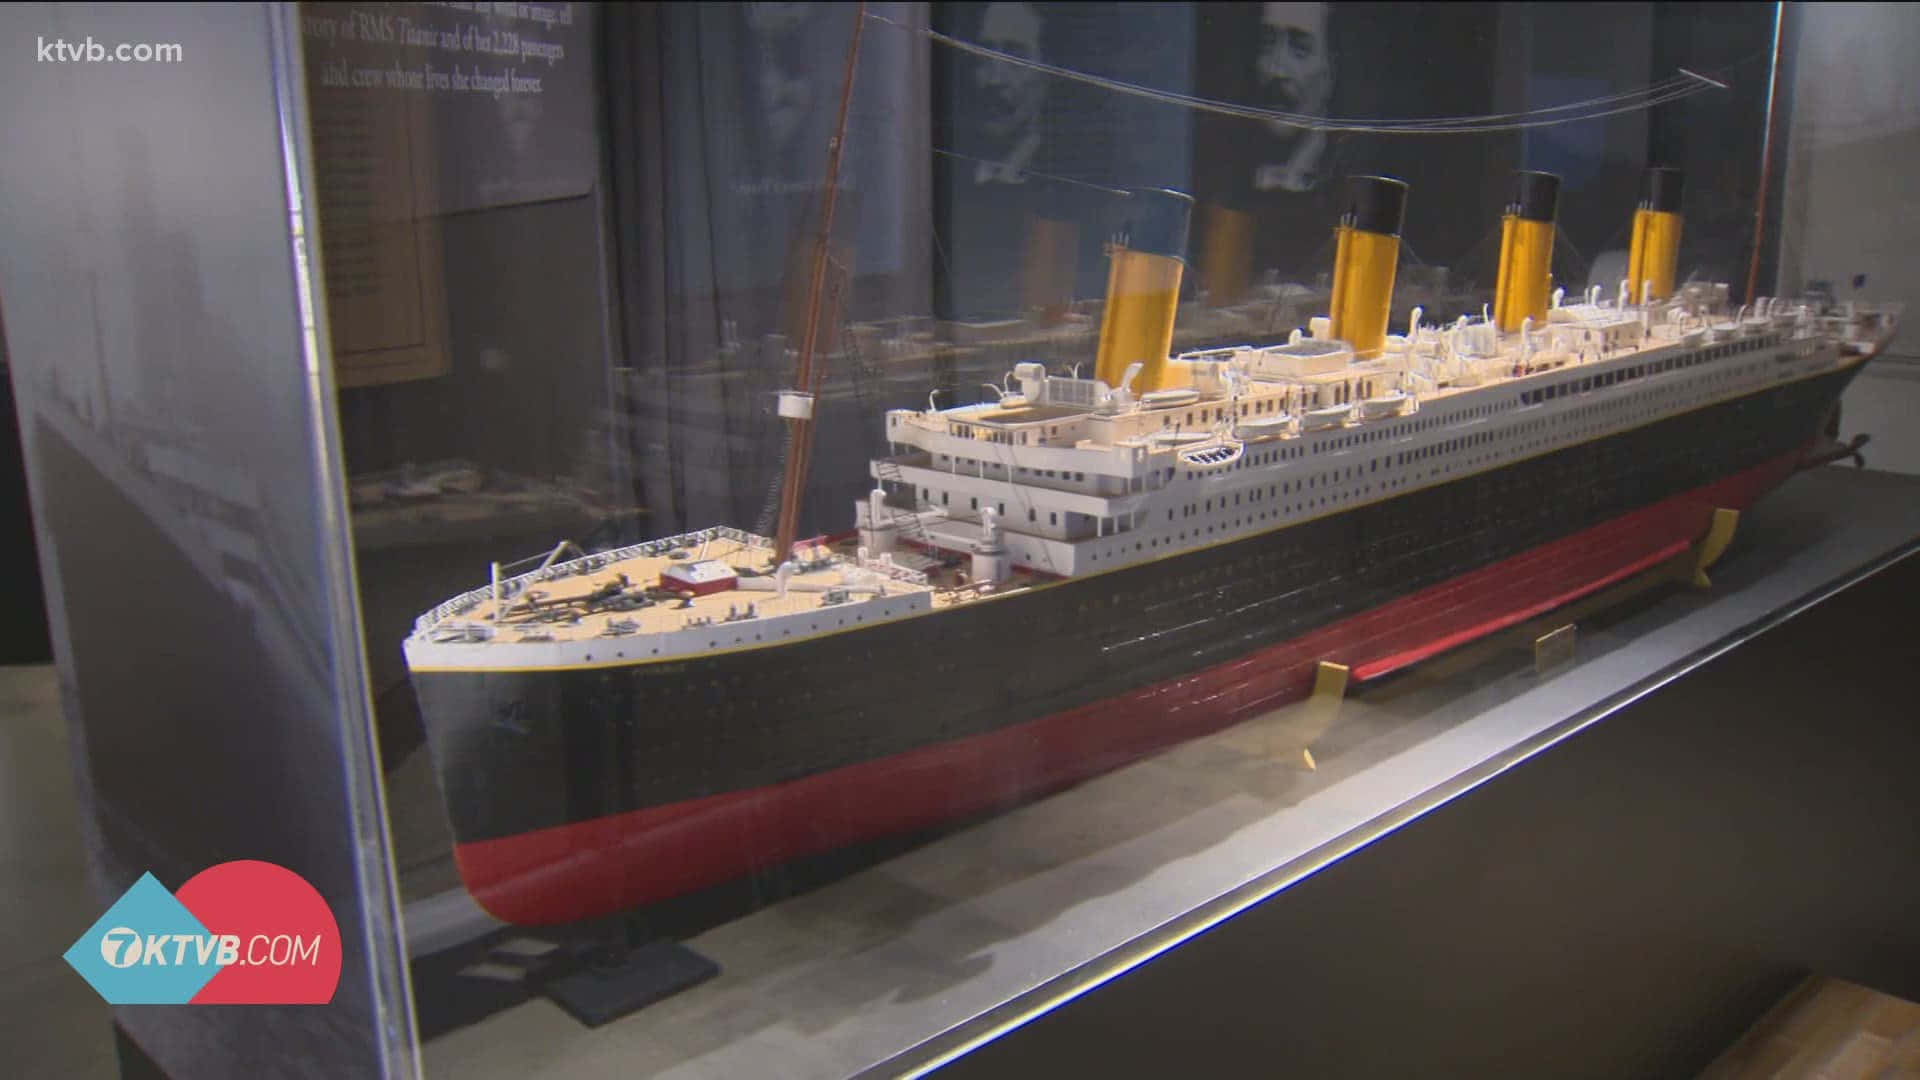 Rms Titanic Museum Ship Model Inside Glass Background